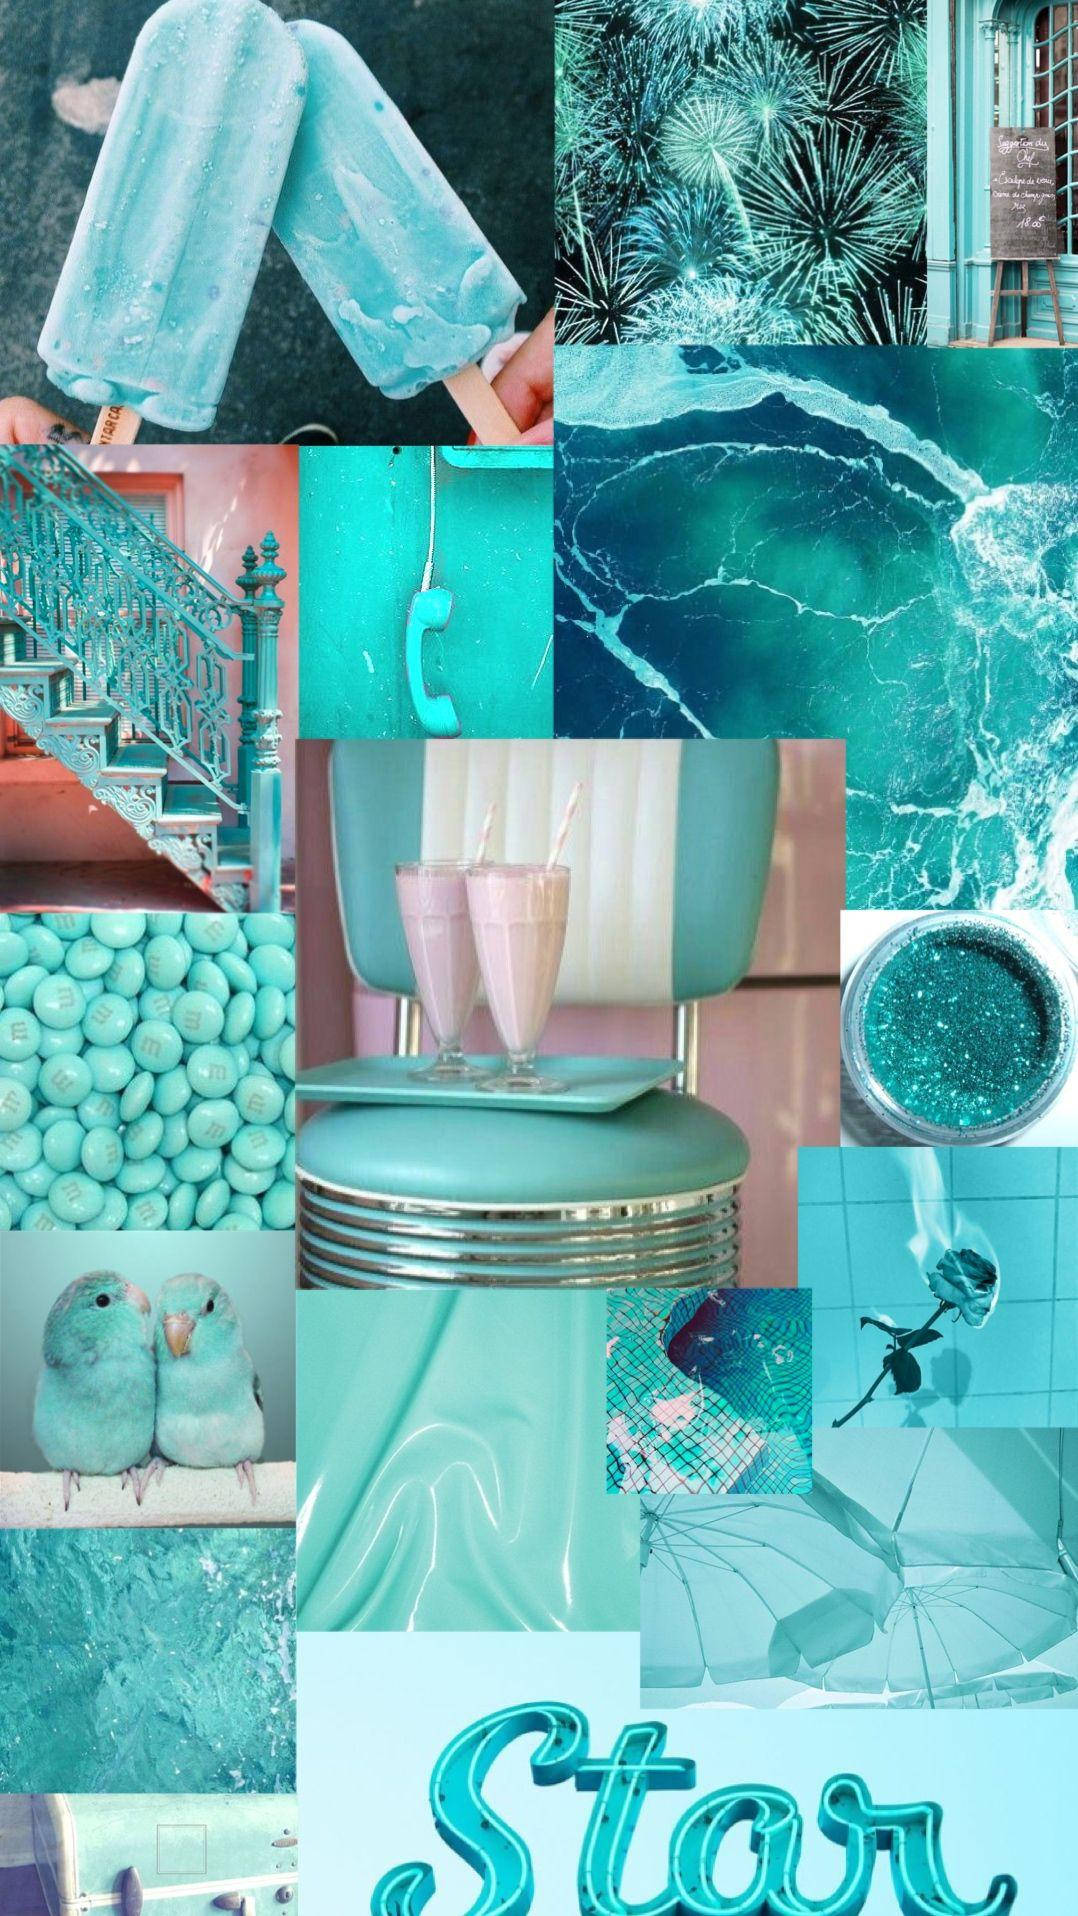 Overlapping Photomontage Aesthetic Teal Wallpaper